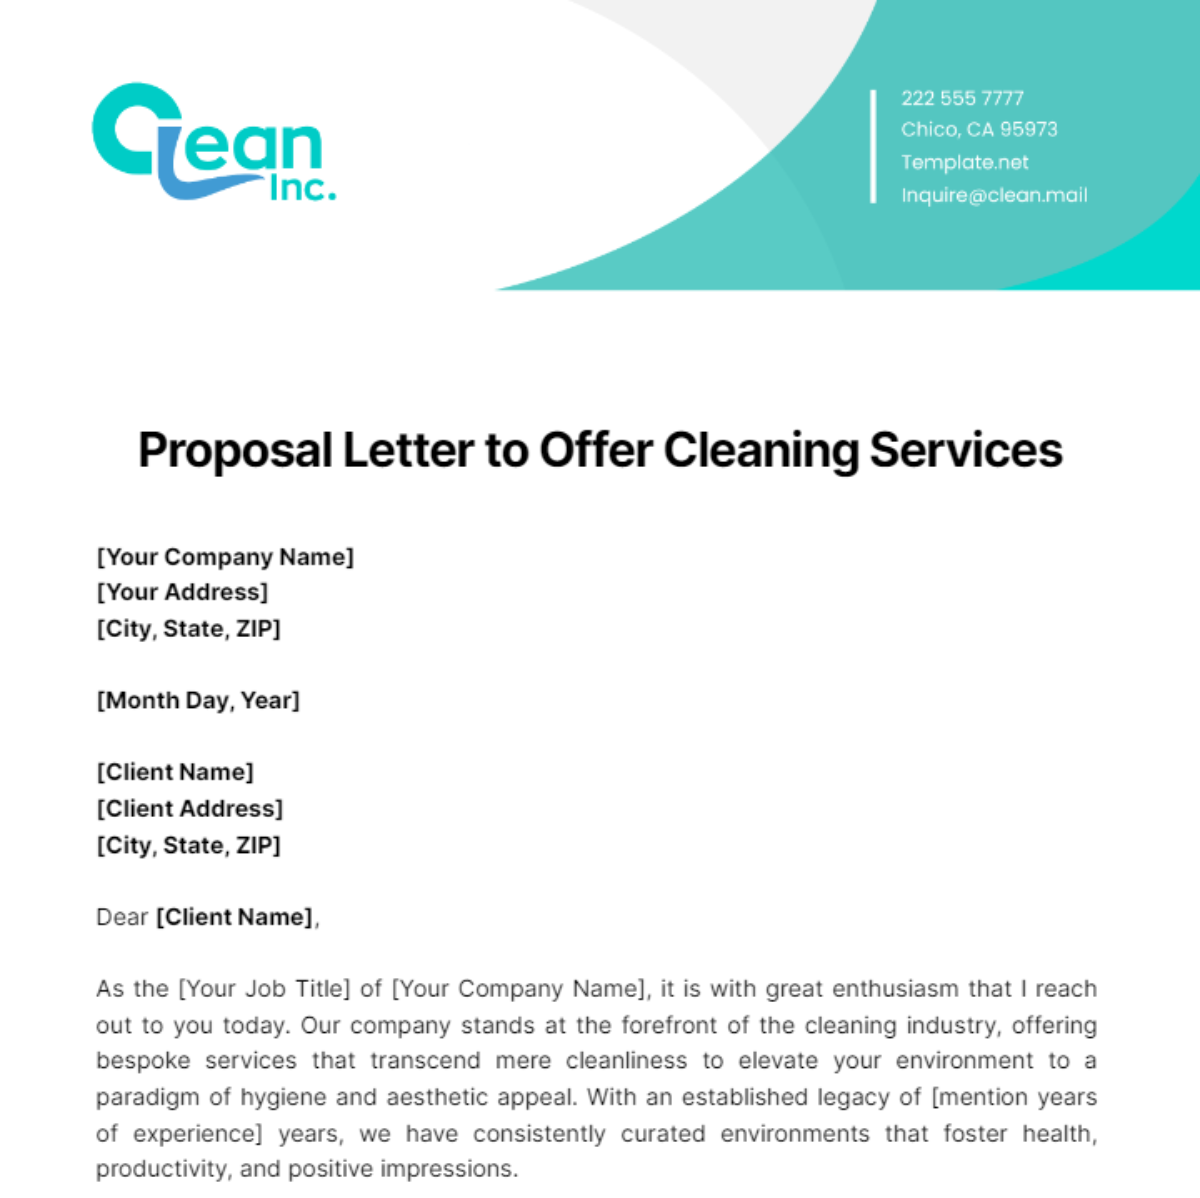 Proposal Letter to Offer Cleaning Services Template